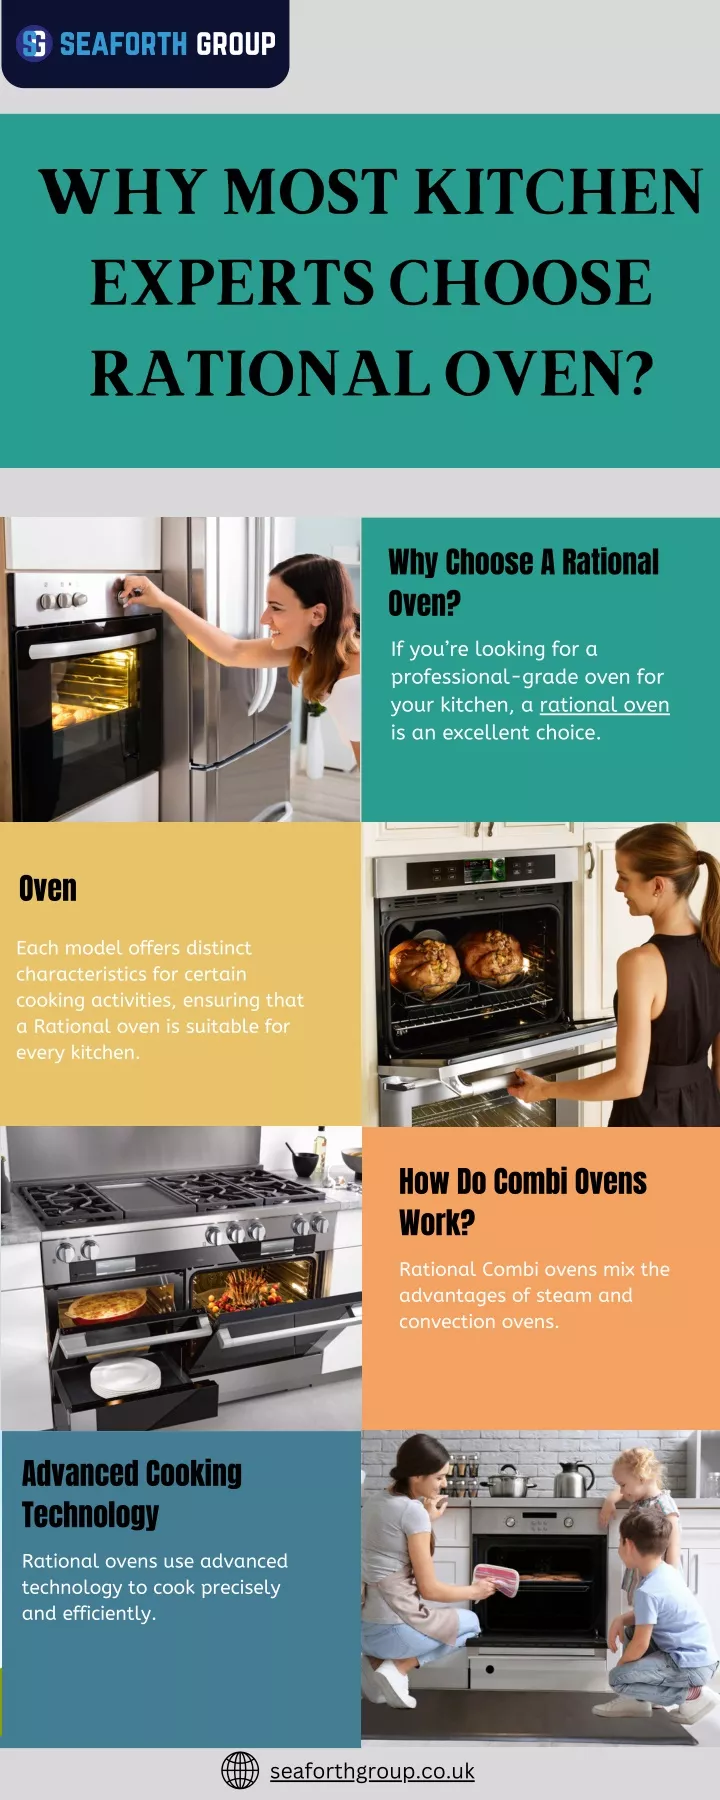 why most kitchen experts choose rational oven